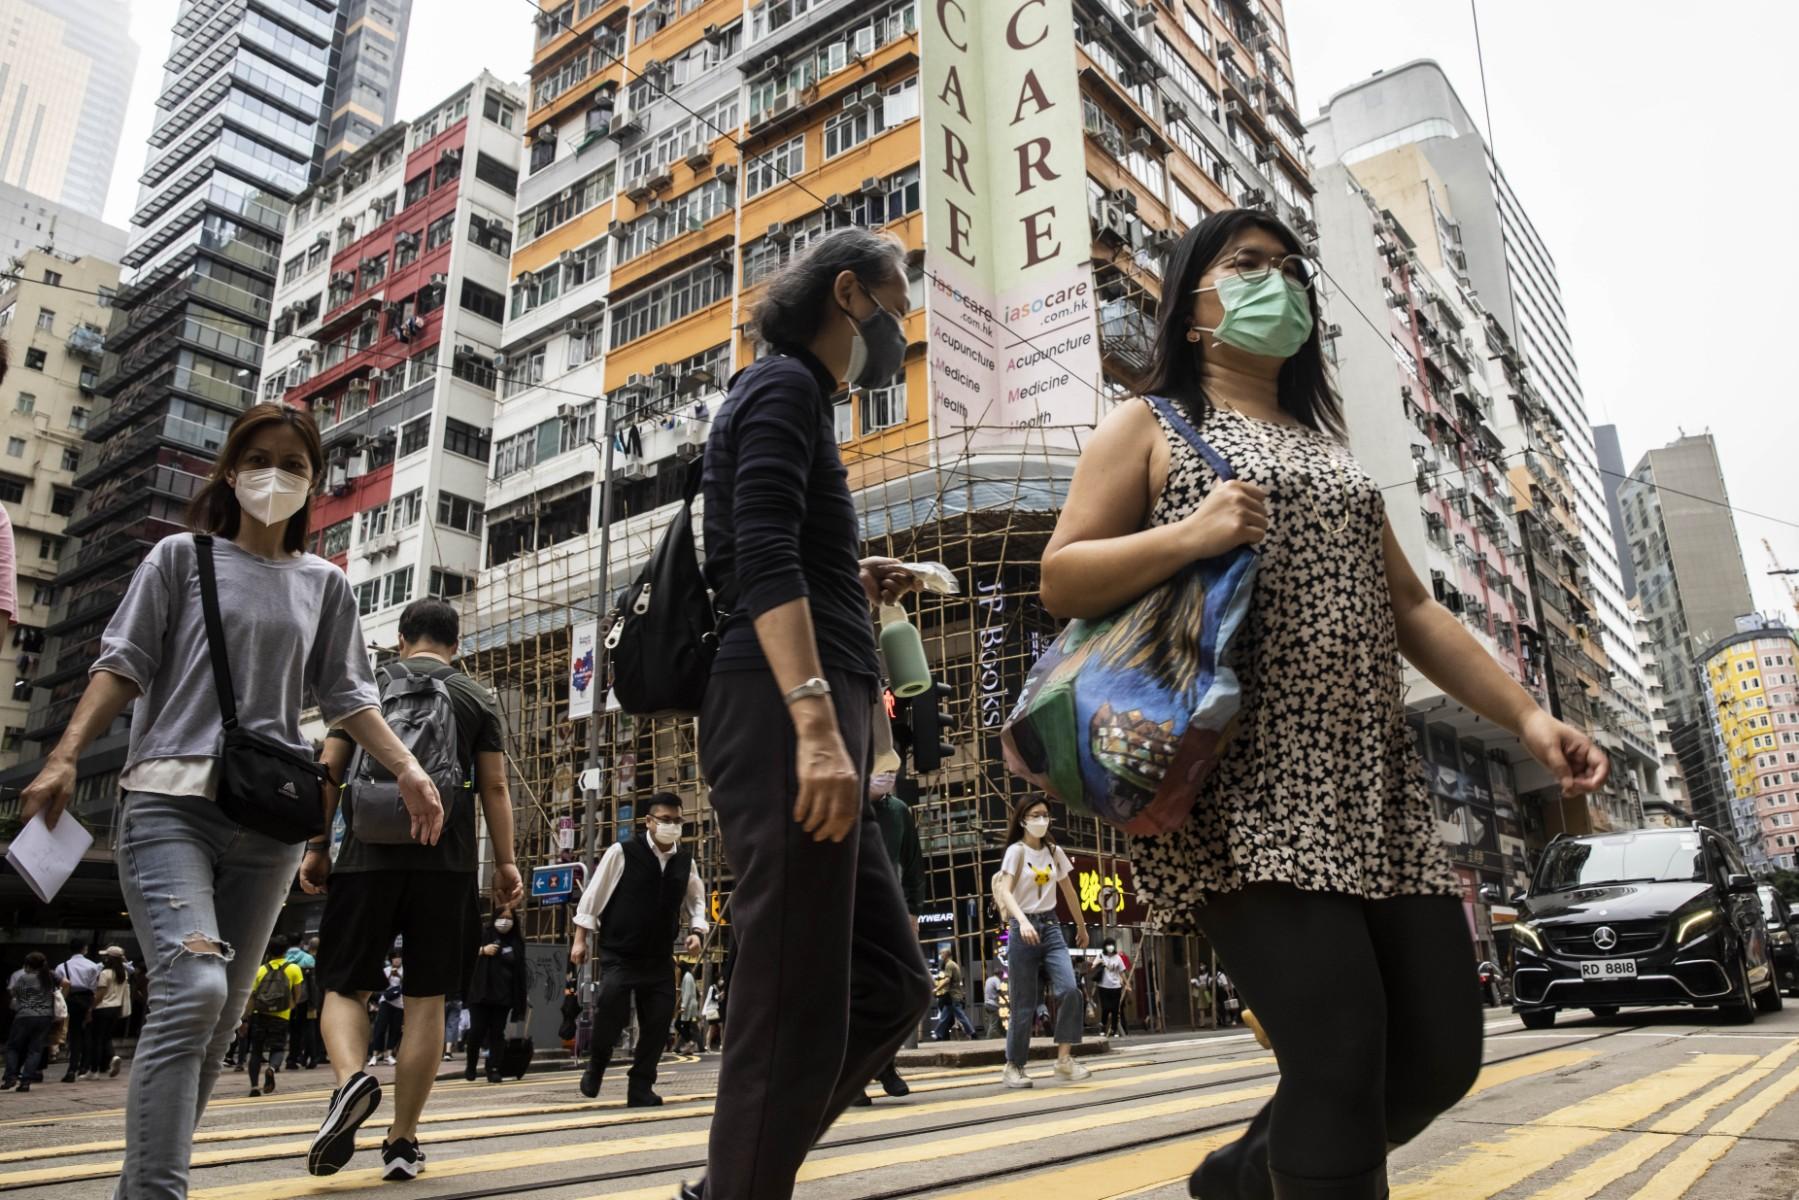 People cross a street in Hong Kong in this May 13 photo. Hong Kong has imposed strict social distancing rules as its hews to a lighter version of China's zero-Covid strategy. Photo: AFP